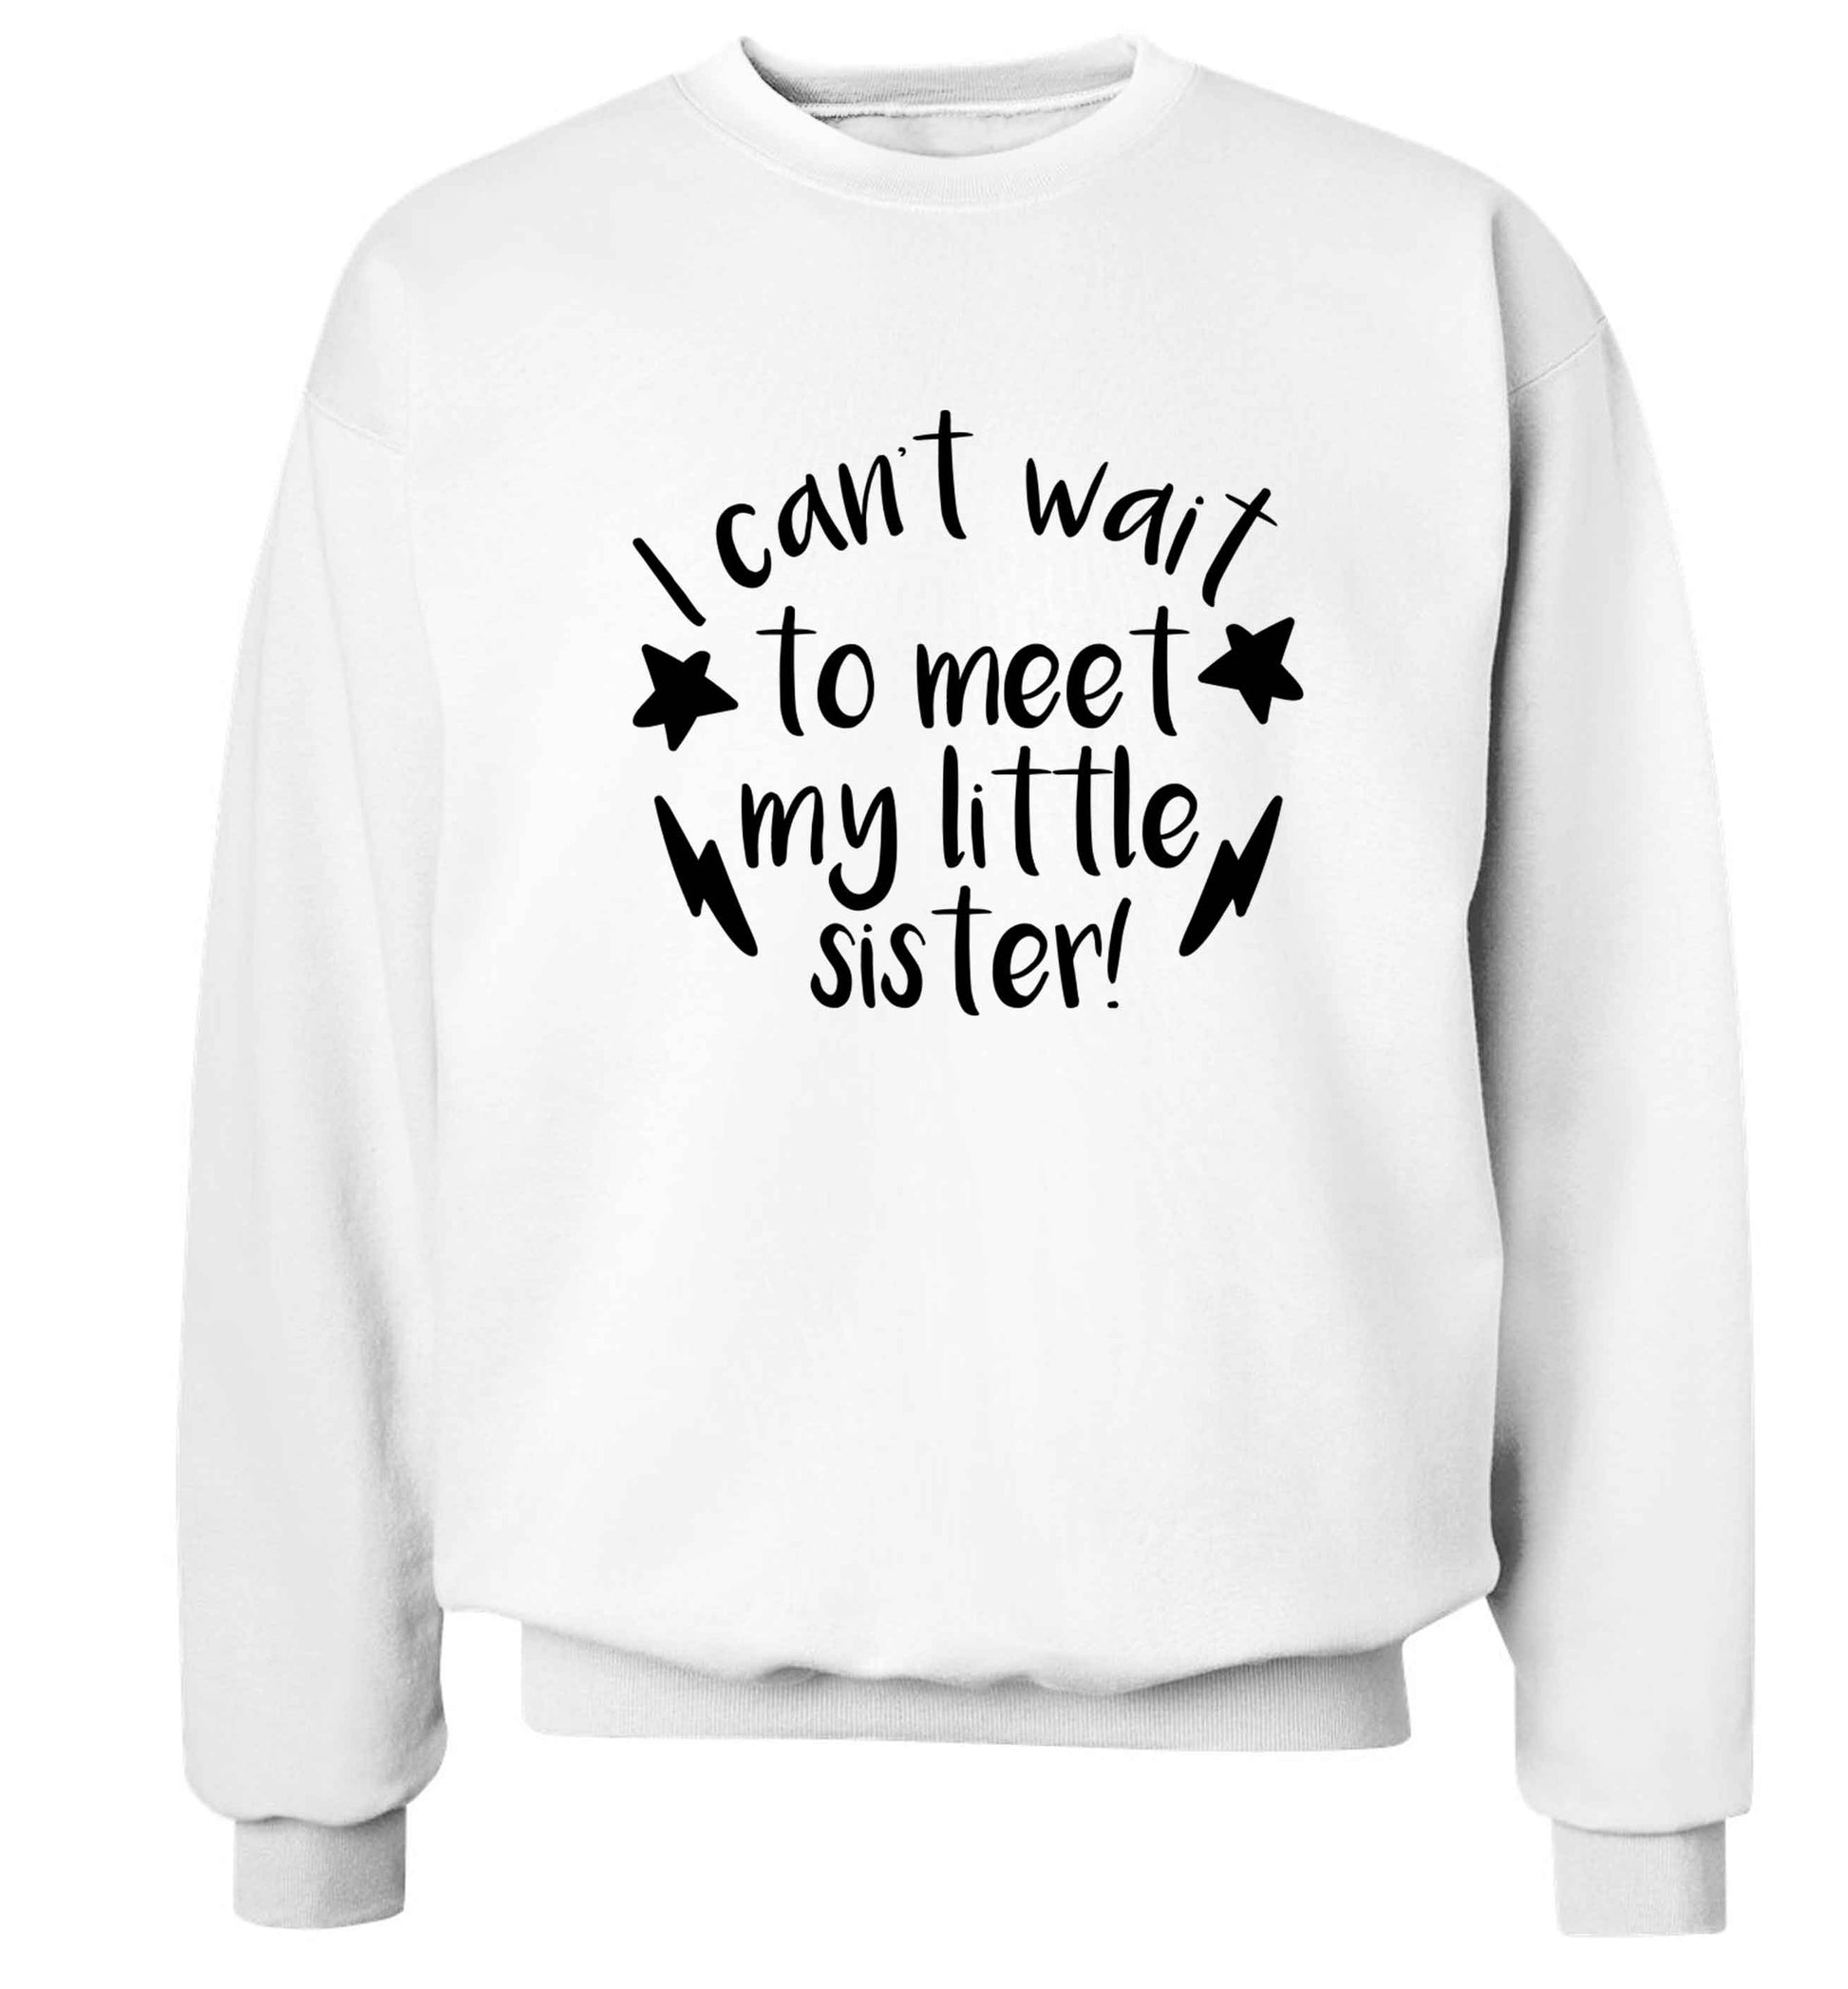 Something special growing inside it's my little sister I can't wait to say hi! Adult's unisex white Sweater 2XL